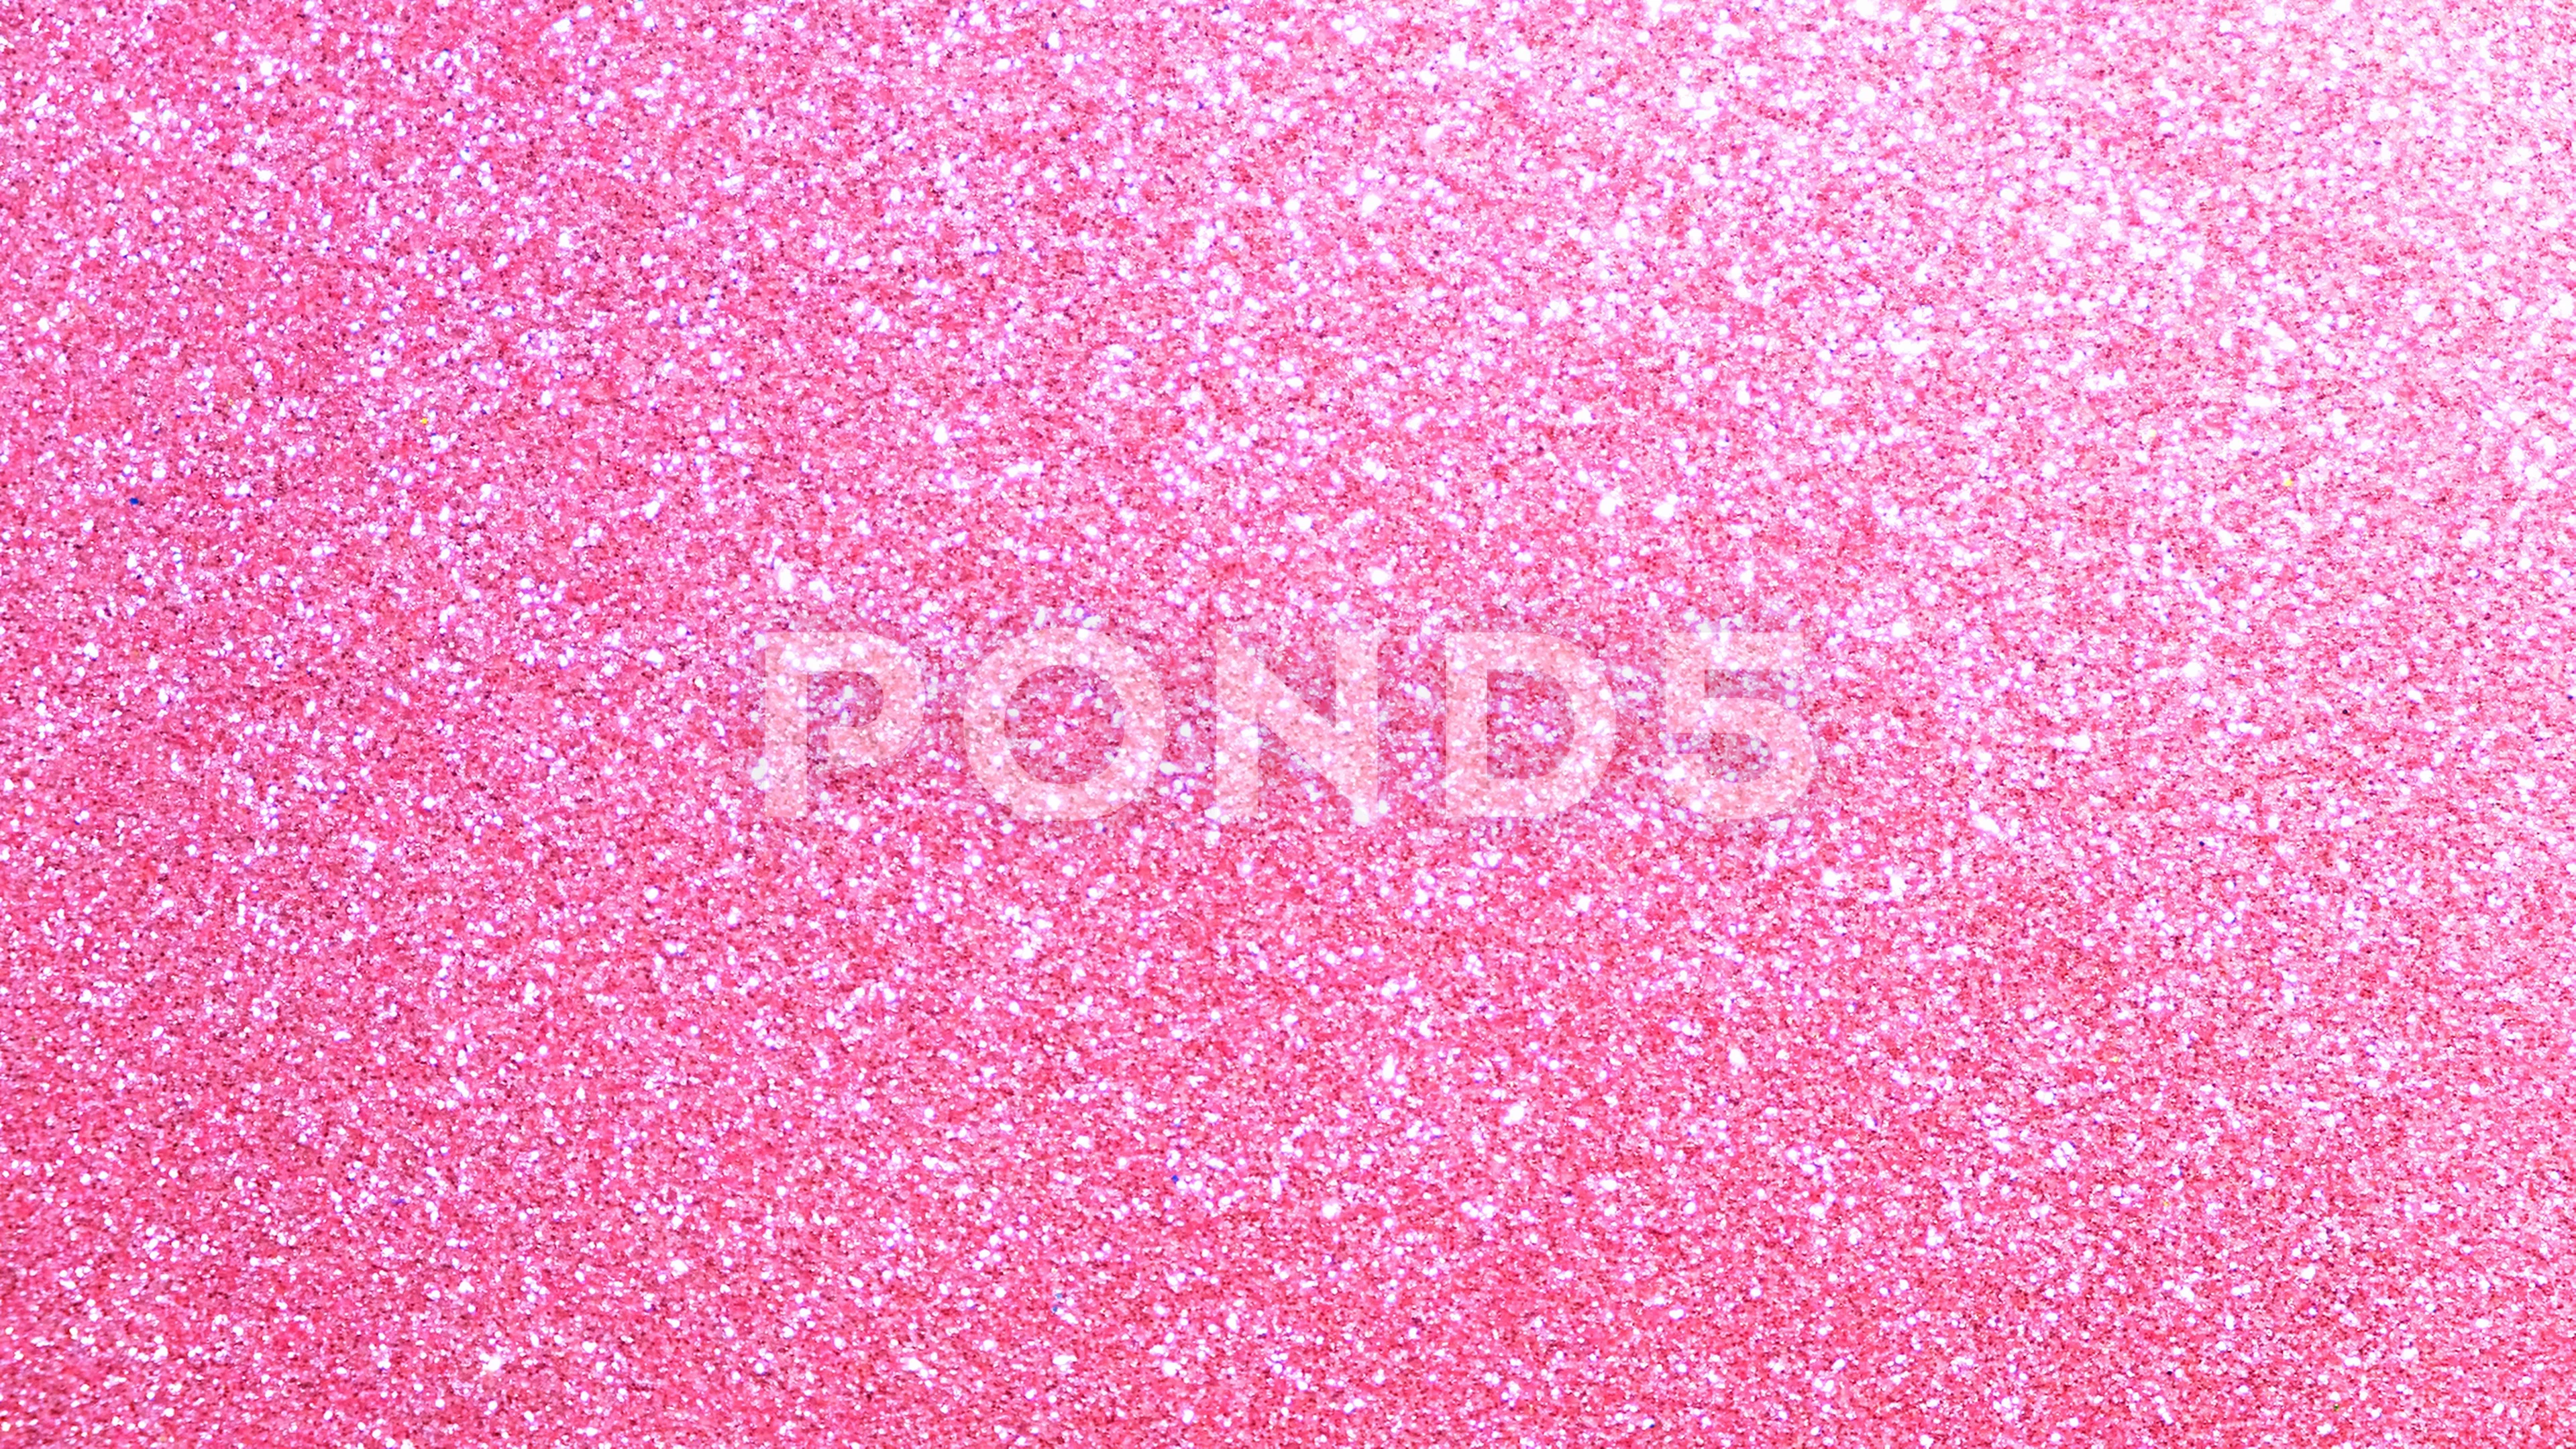 634,271 Pink Glitter Background Images, Stock Photos, 3D objects